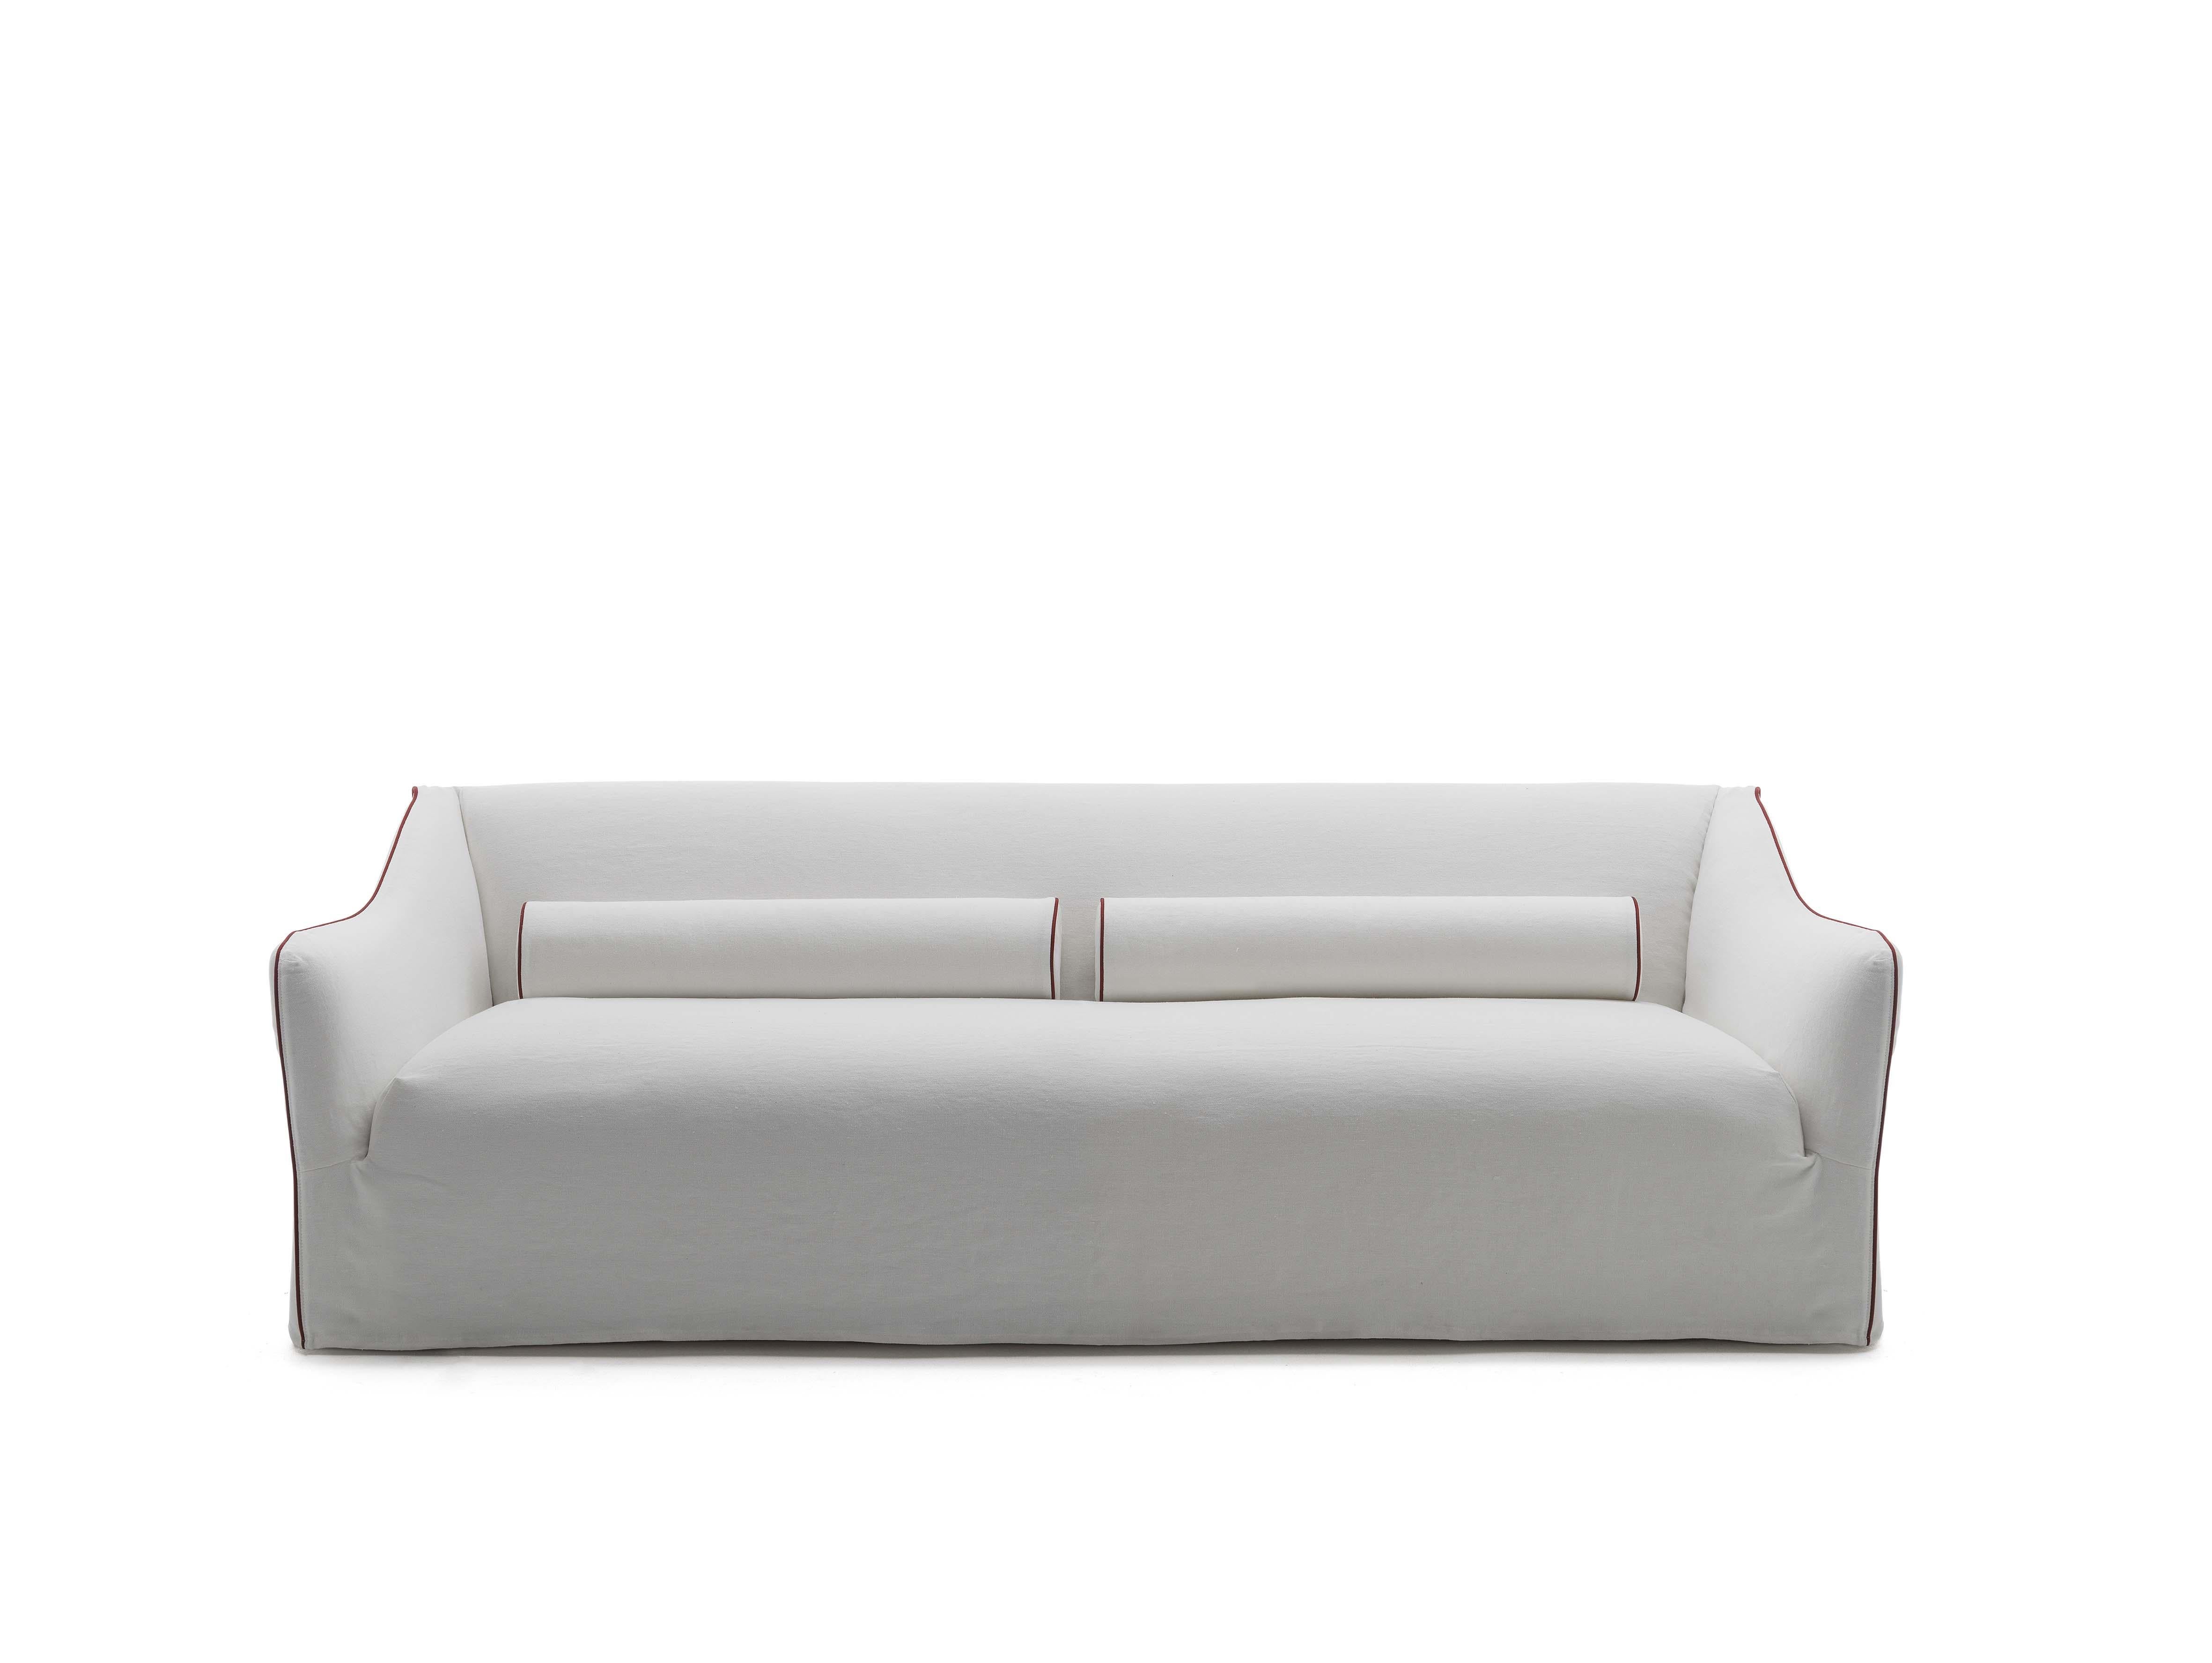 Upholstery Gervasoni Sofa Upholstered Saia 10 by David Lopez Quincoces For Sale